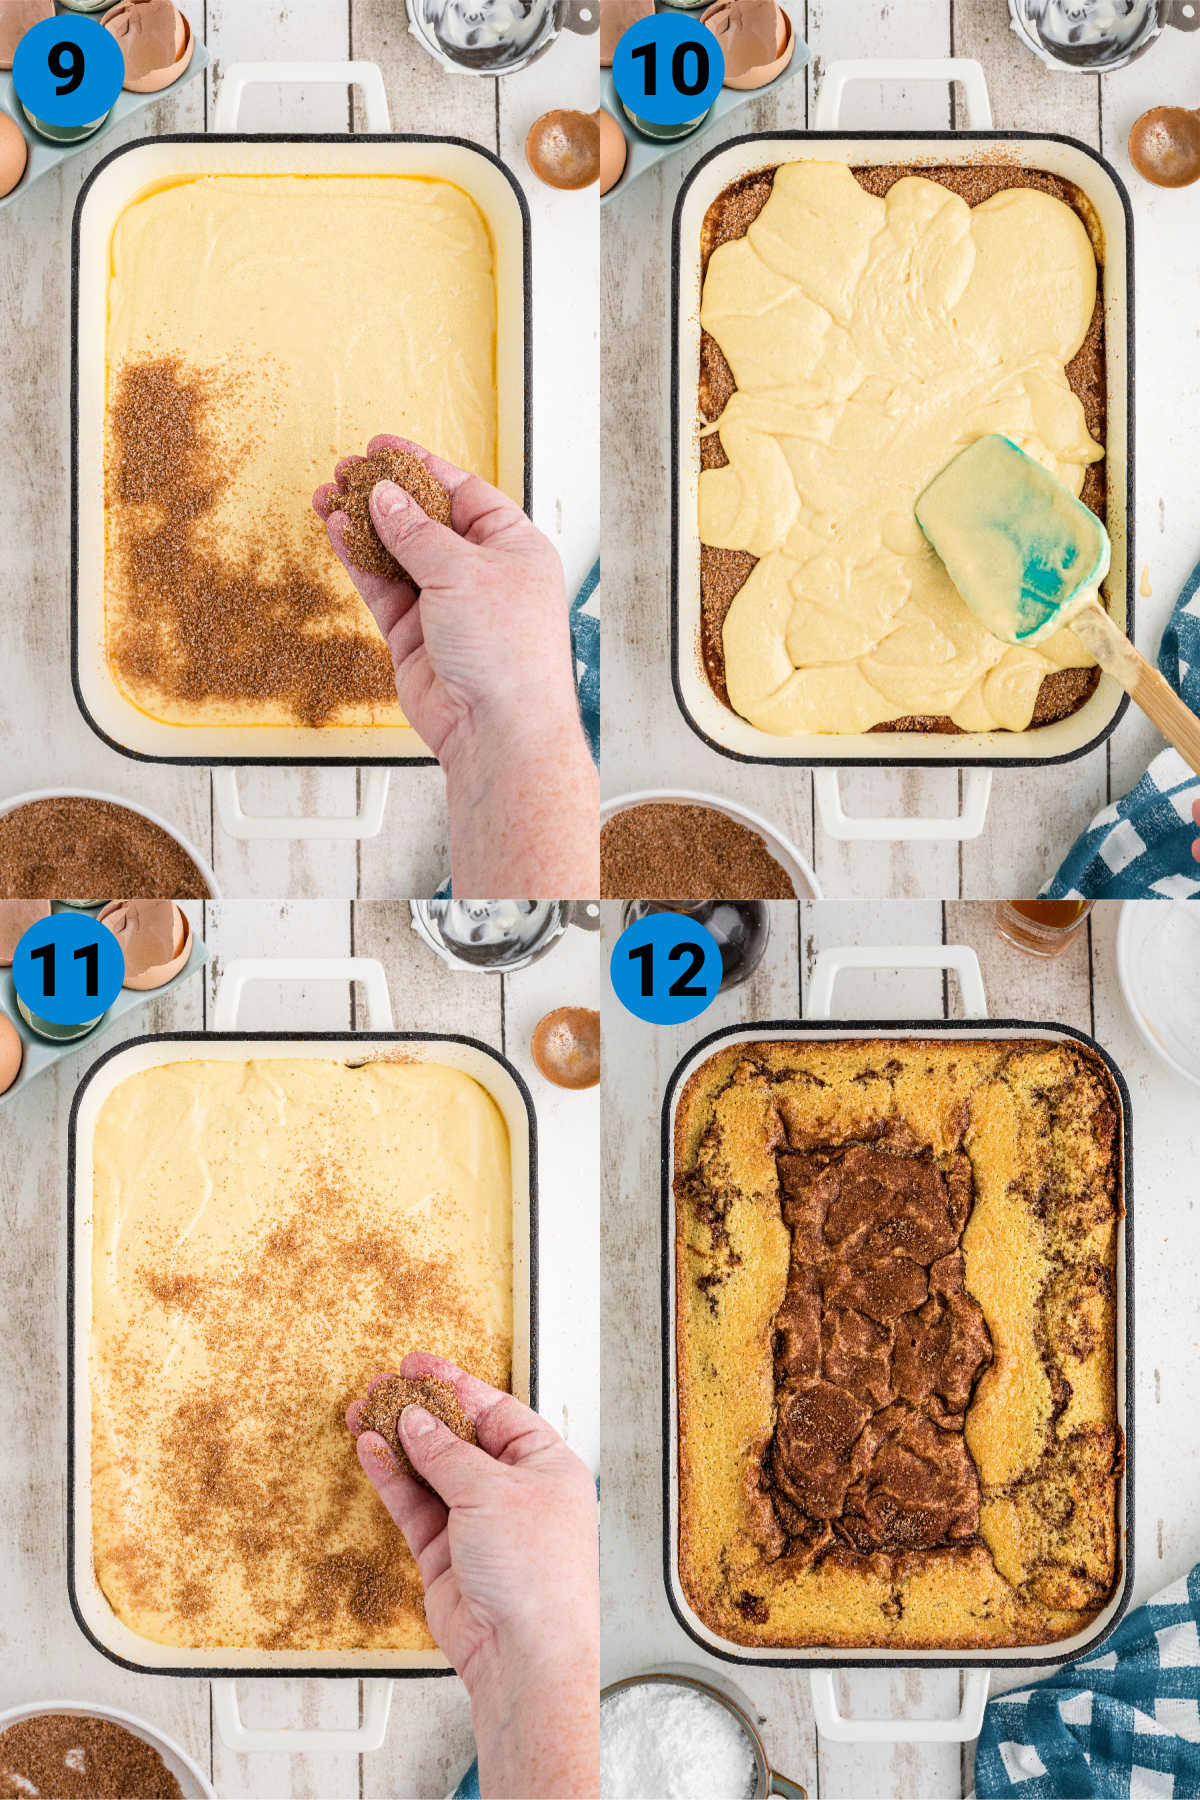 A collage of four images showing how to make a honey bun cake recipe from scratch, steps 9 through 12.